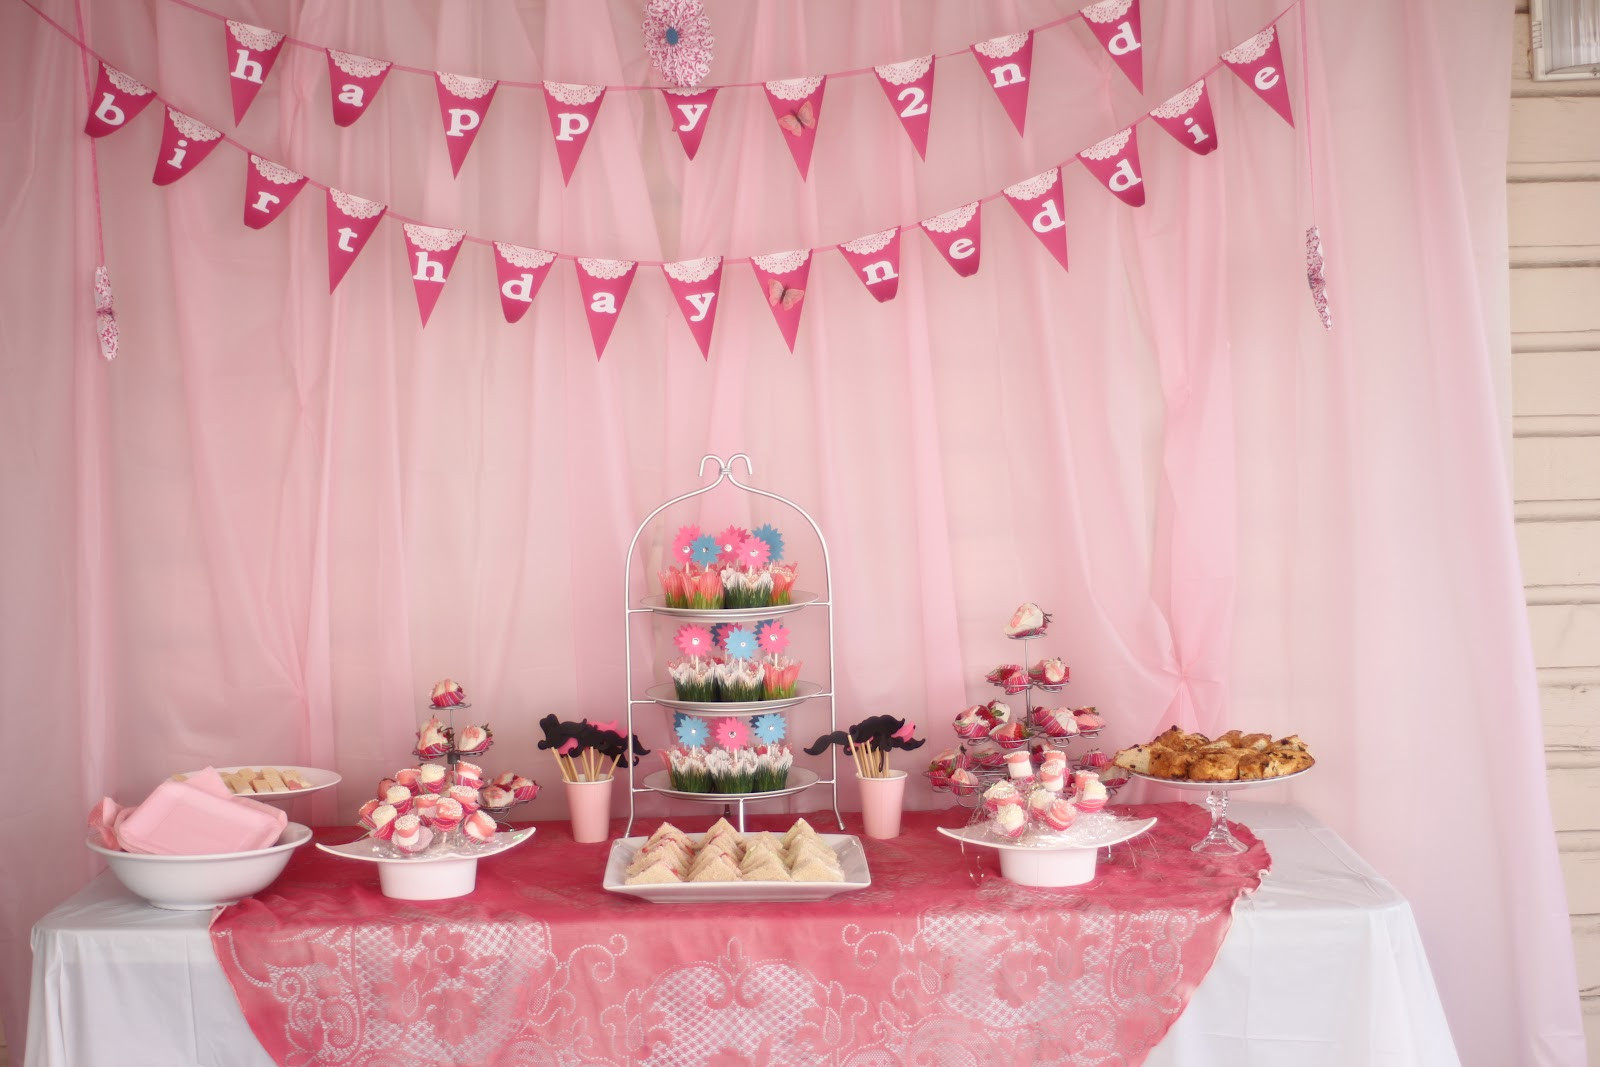 2 Yr Old Girl Birthday Party Ideas
 Ideas For A 2 Year Old Birthday Party